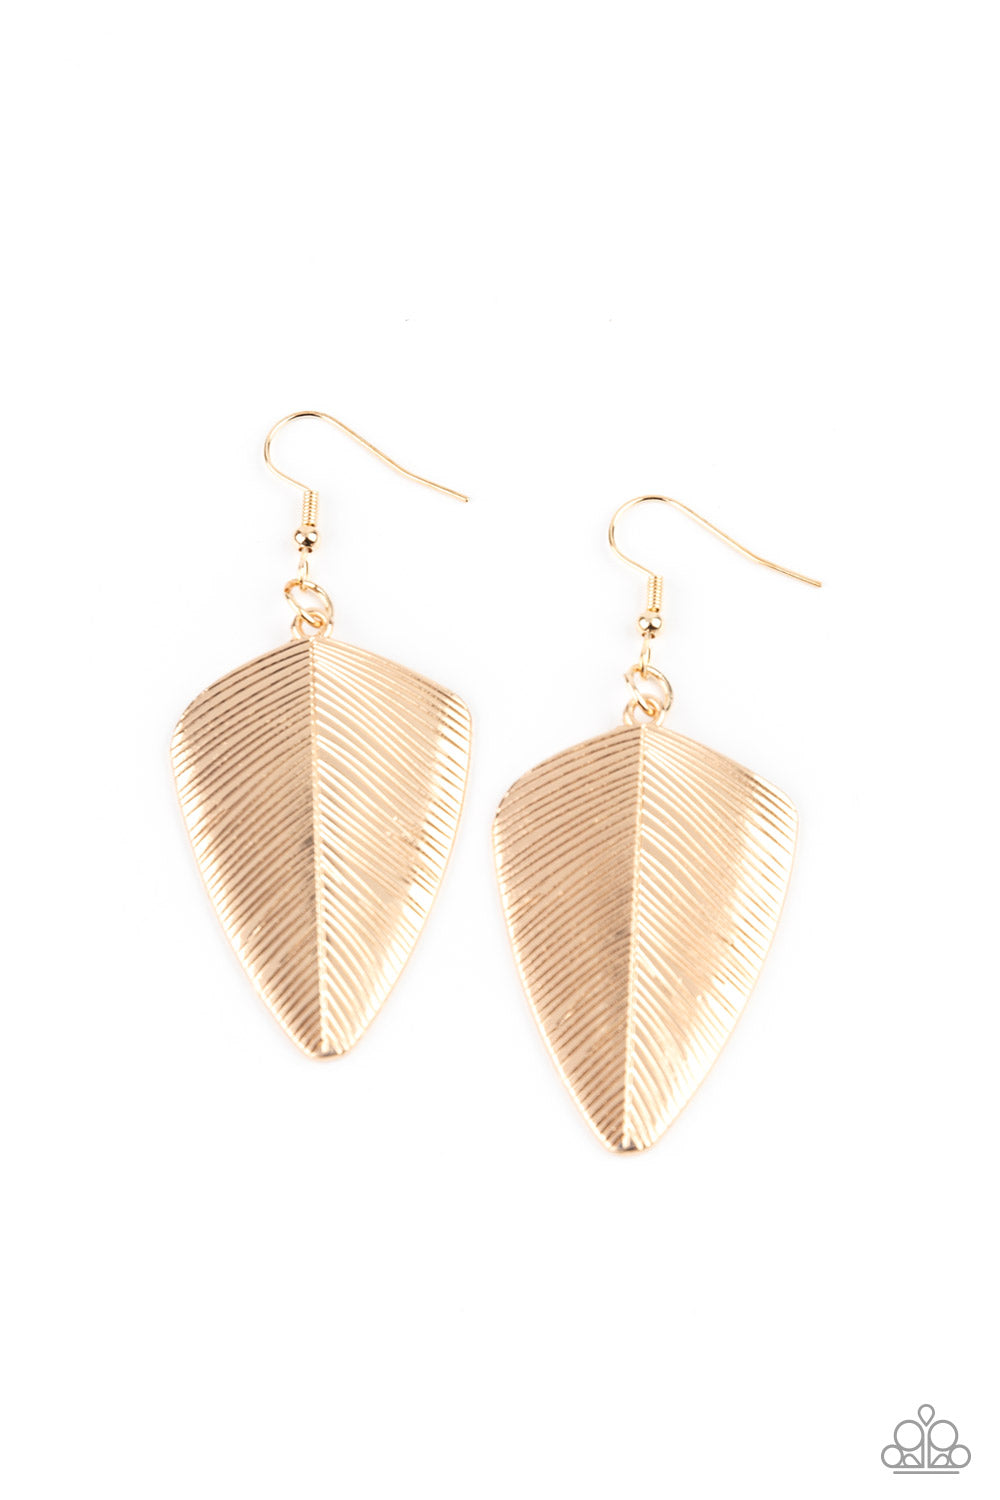 One Of The Flock - Gold Earrings - Paparazzi Accessories - Paparazzi Accessories 